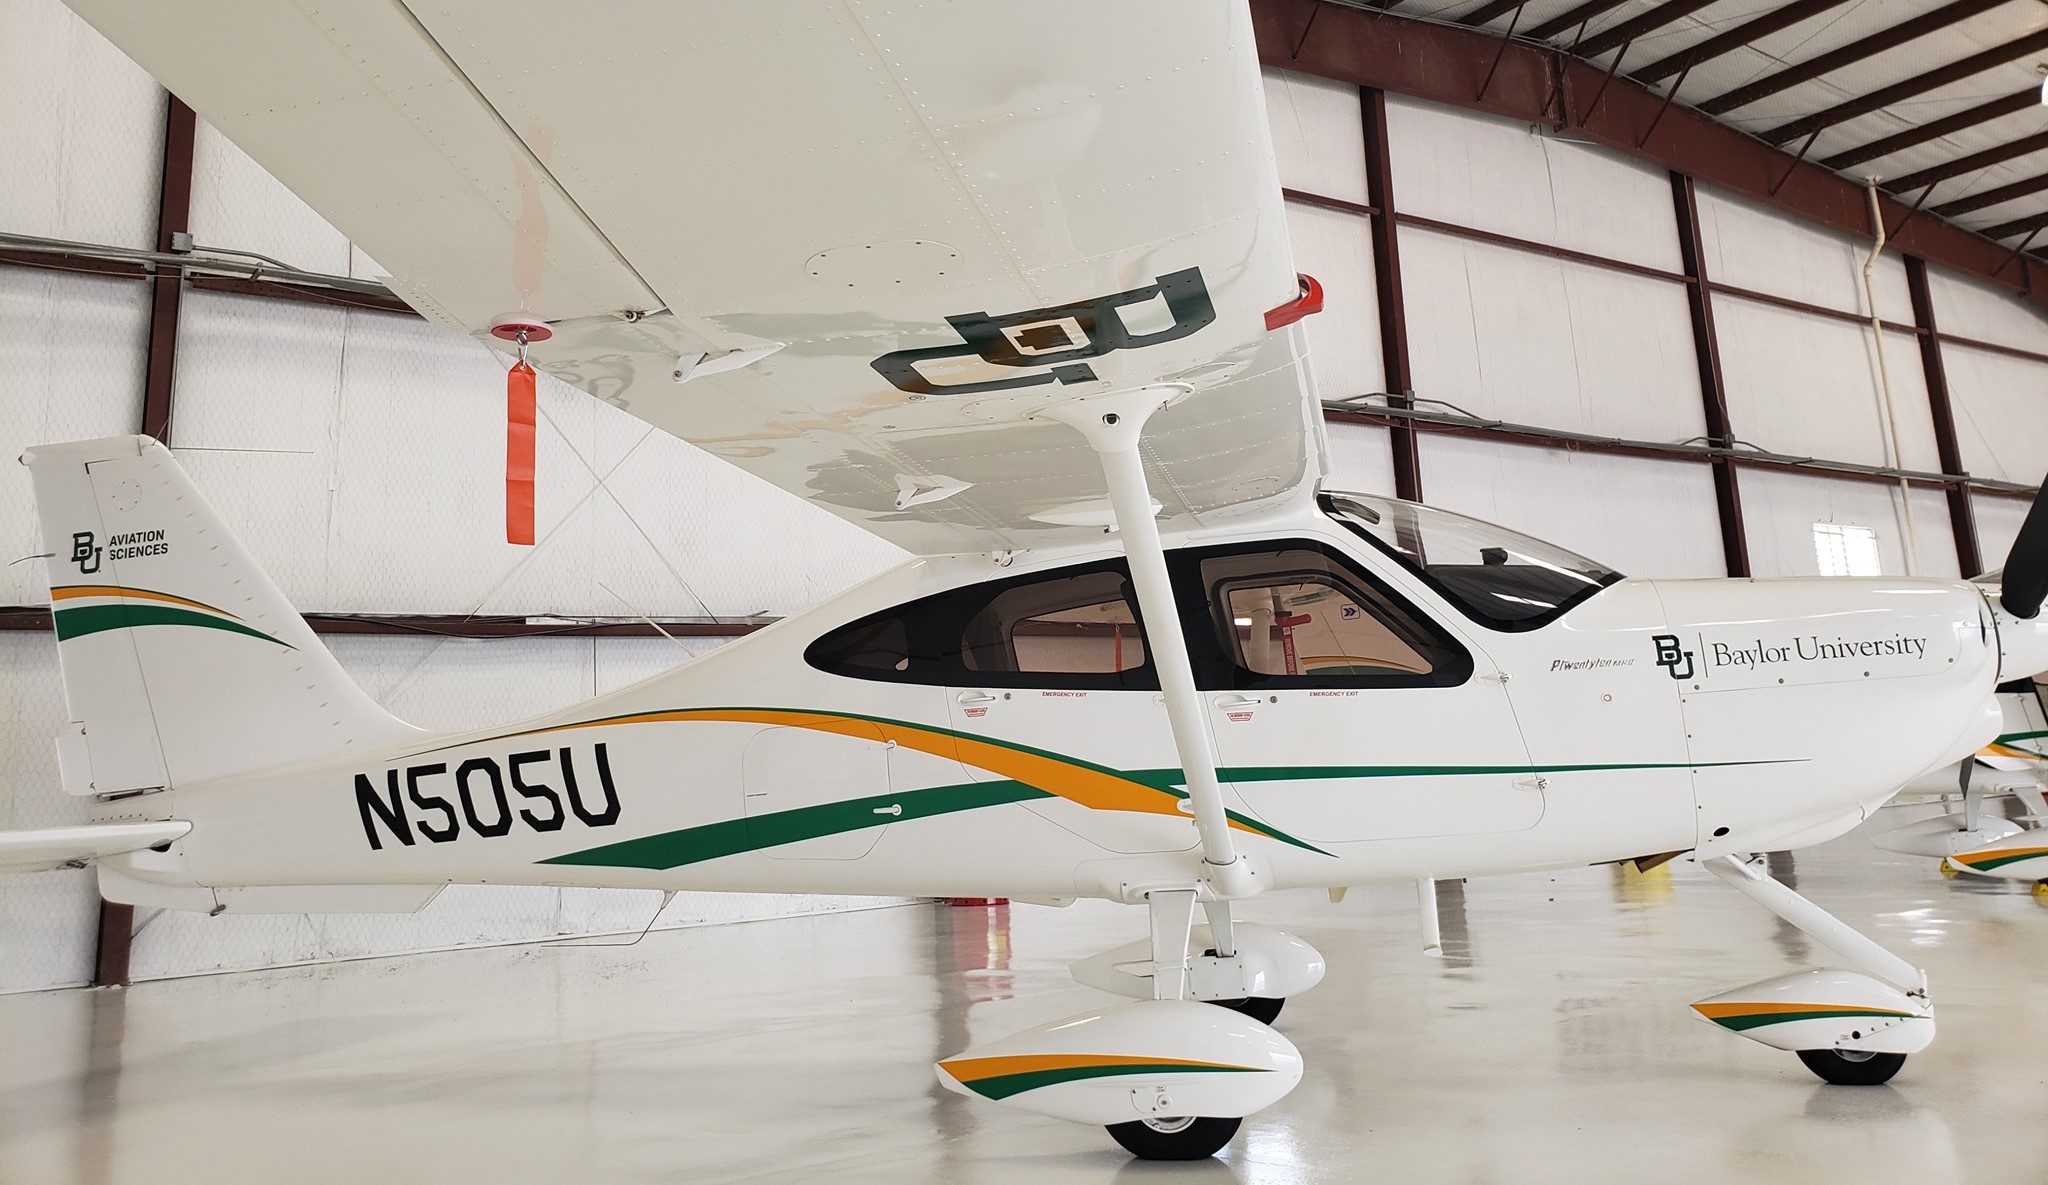 Baylor Insititute of Air Sciences Plane 